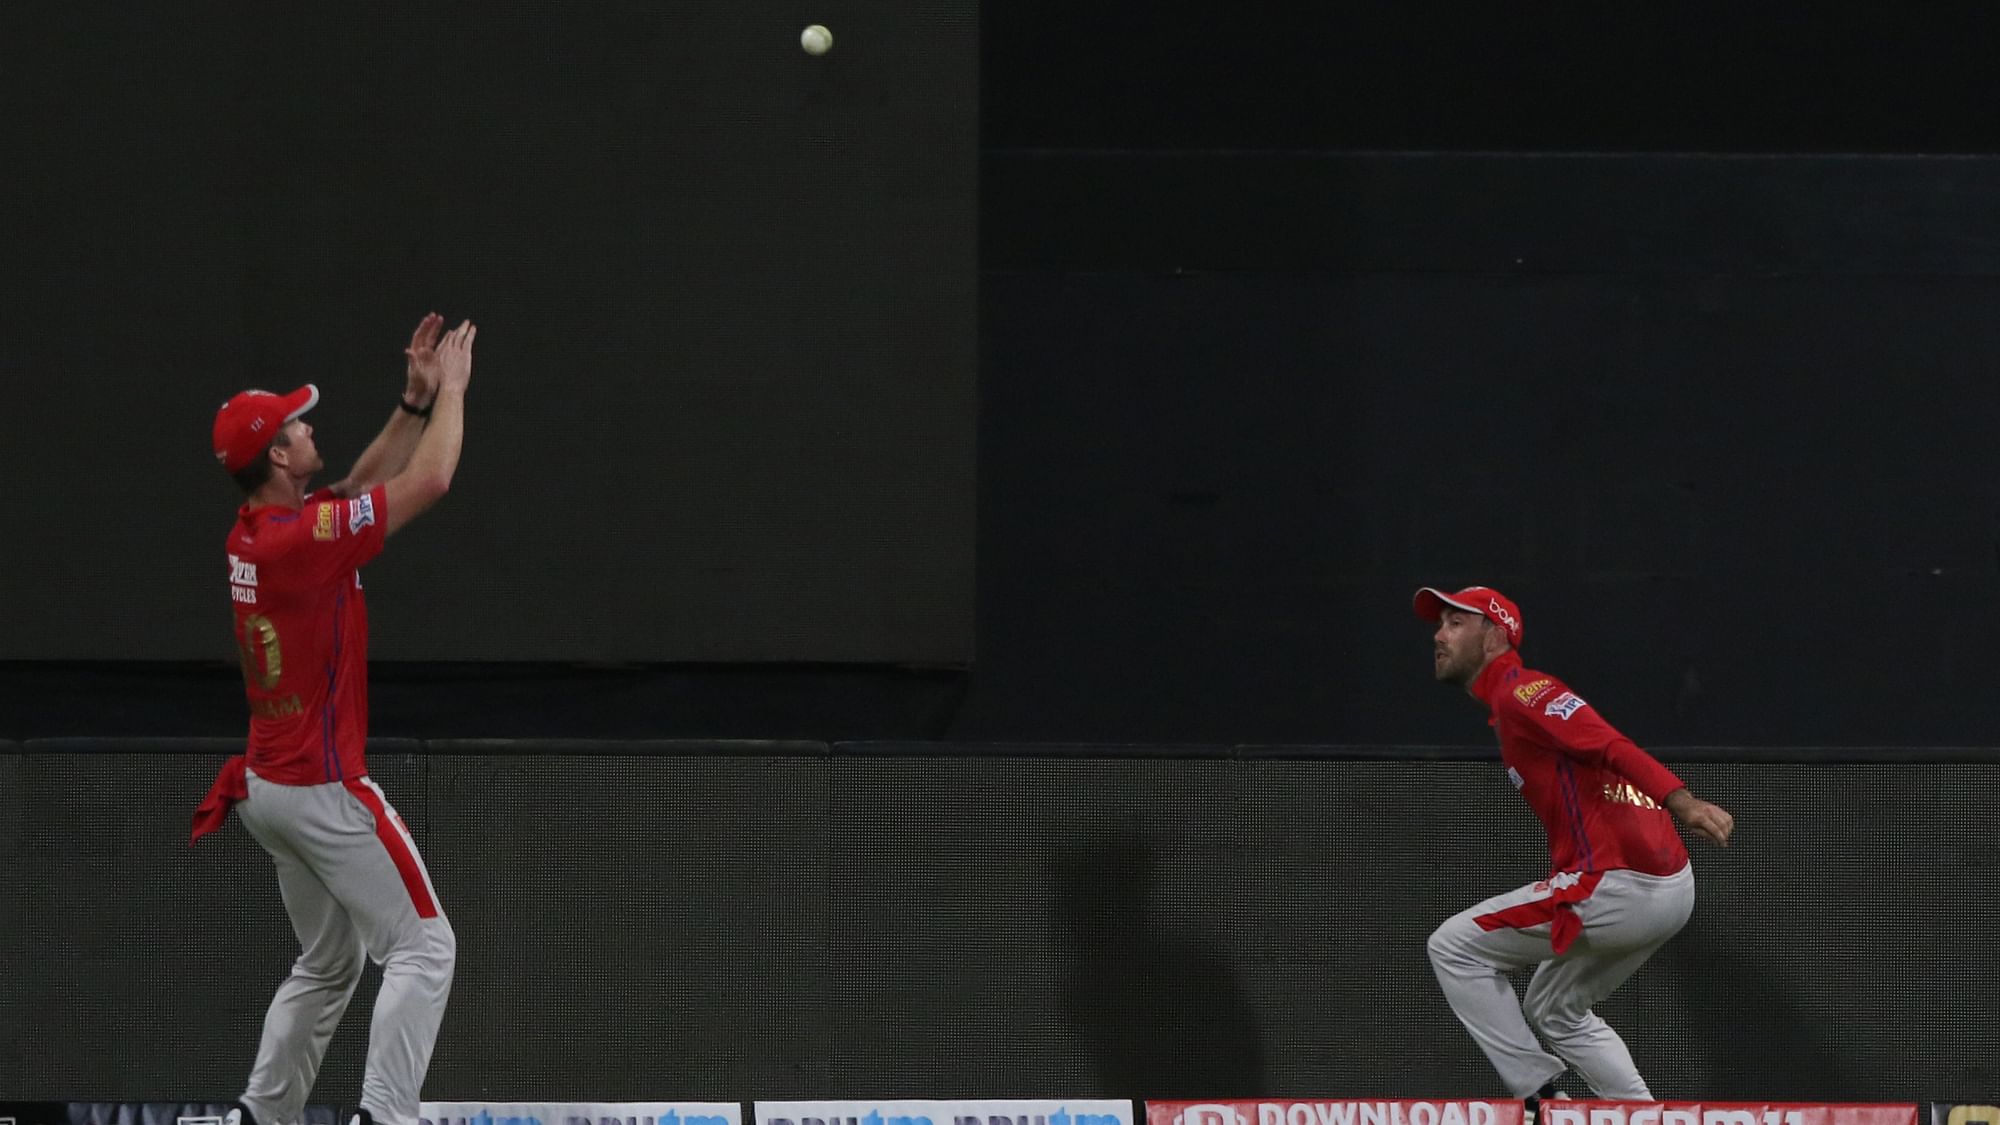 Kings XI Punjab’s duo of Jimmy Neesham and Glenn Maxwell combined to pull-off a relay catch on the boundary